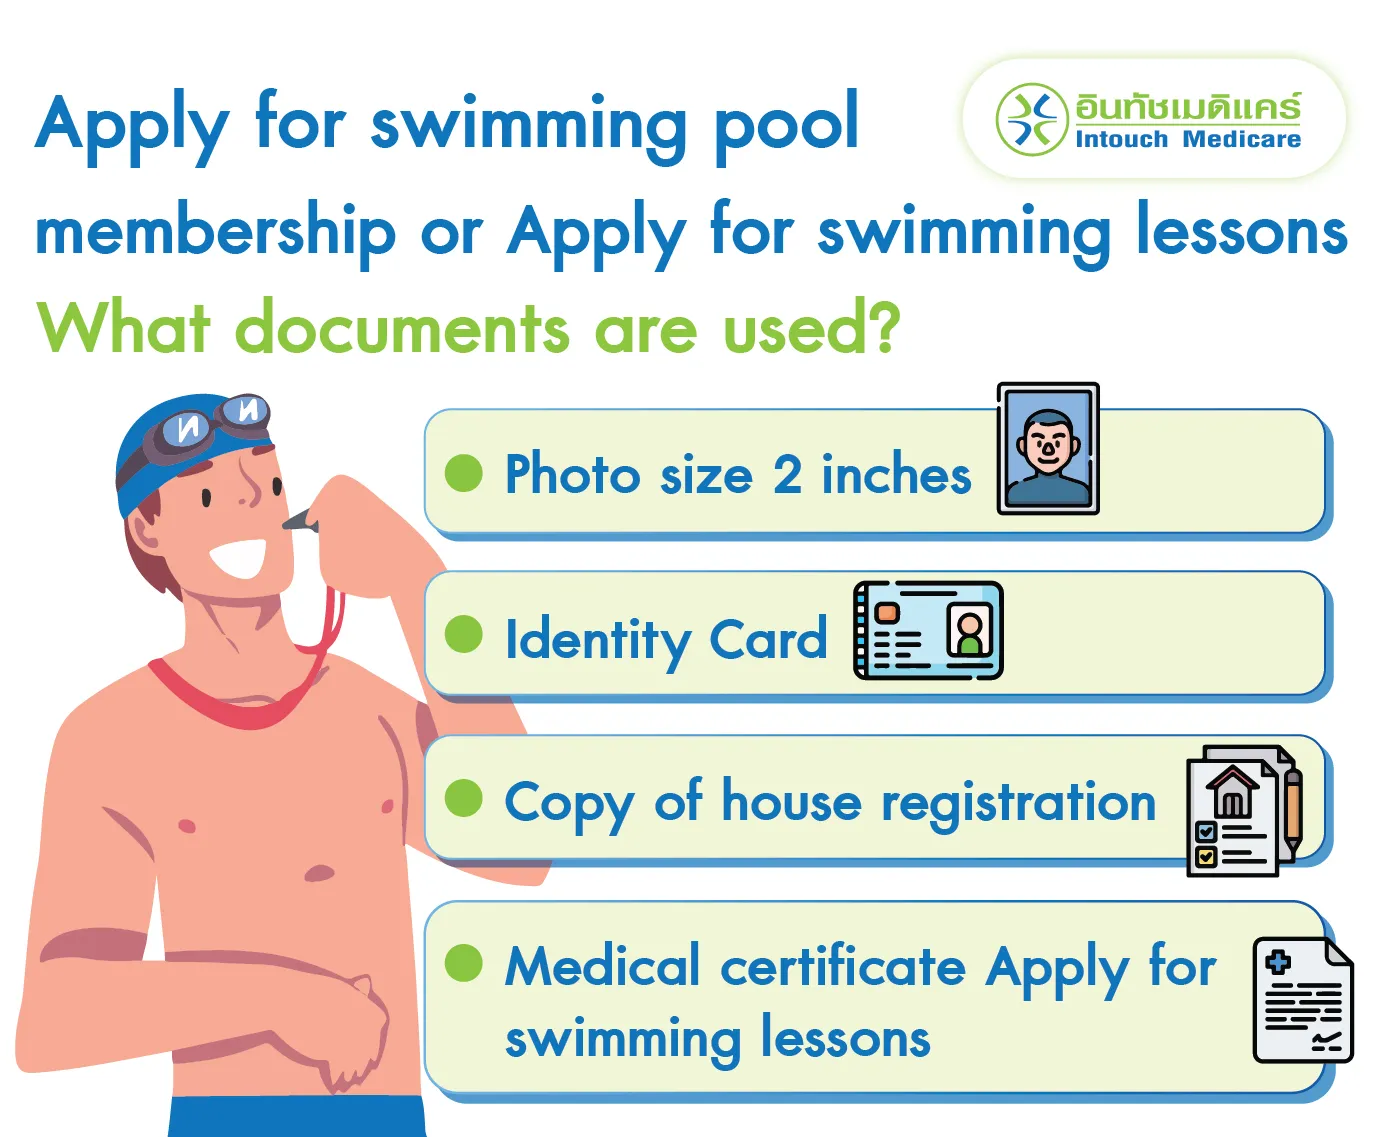 Apply for swimming pool membership Apply for swimming lessons What documents are used?